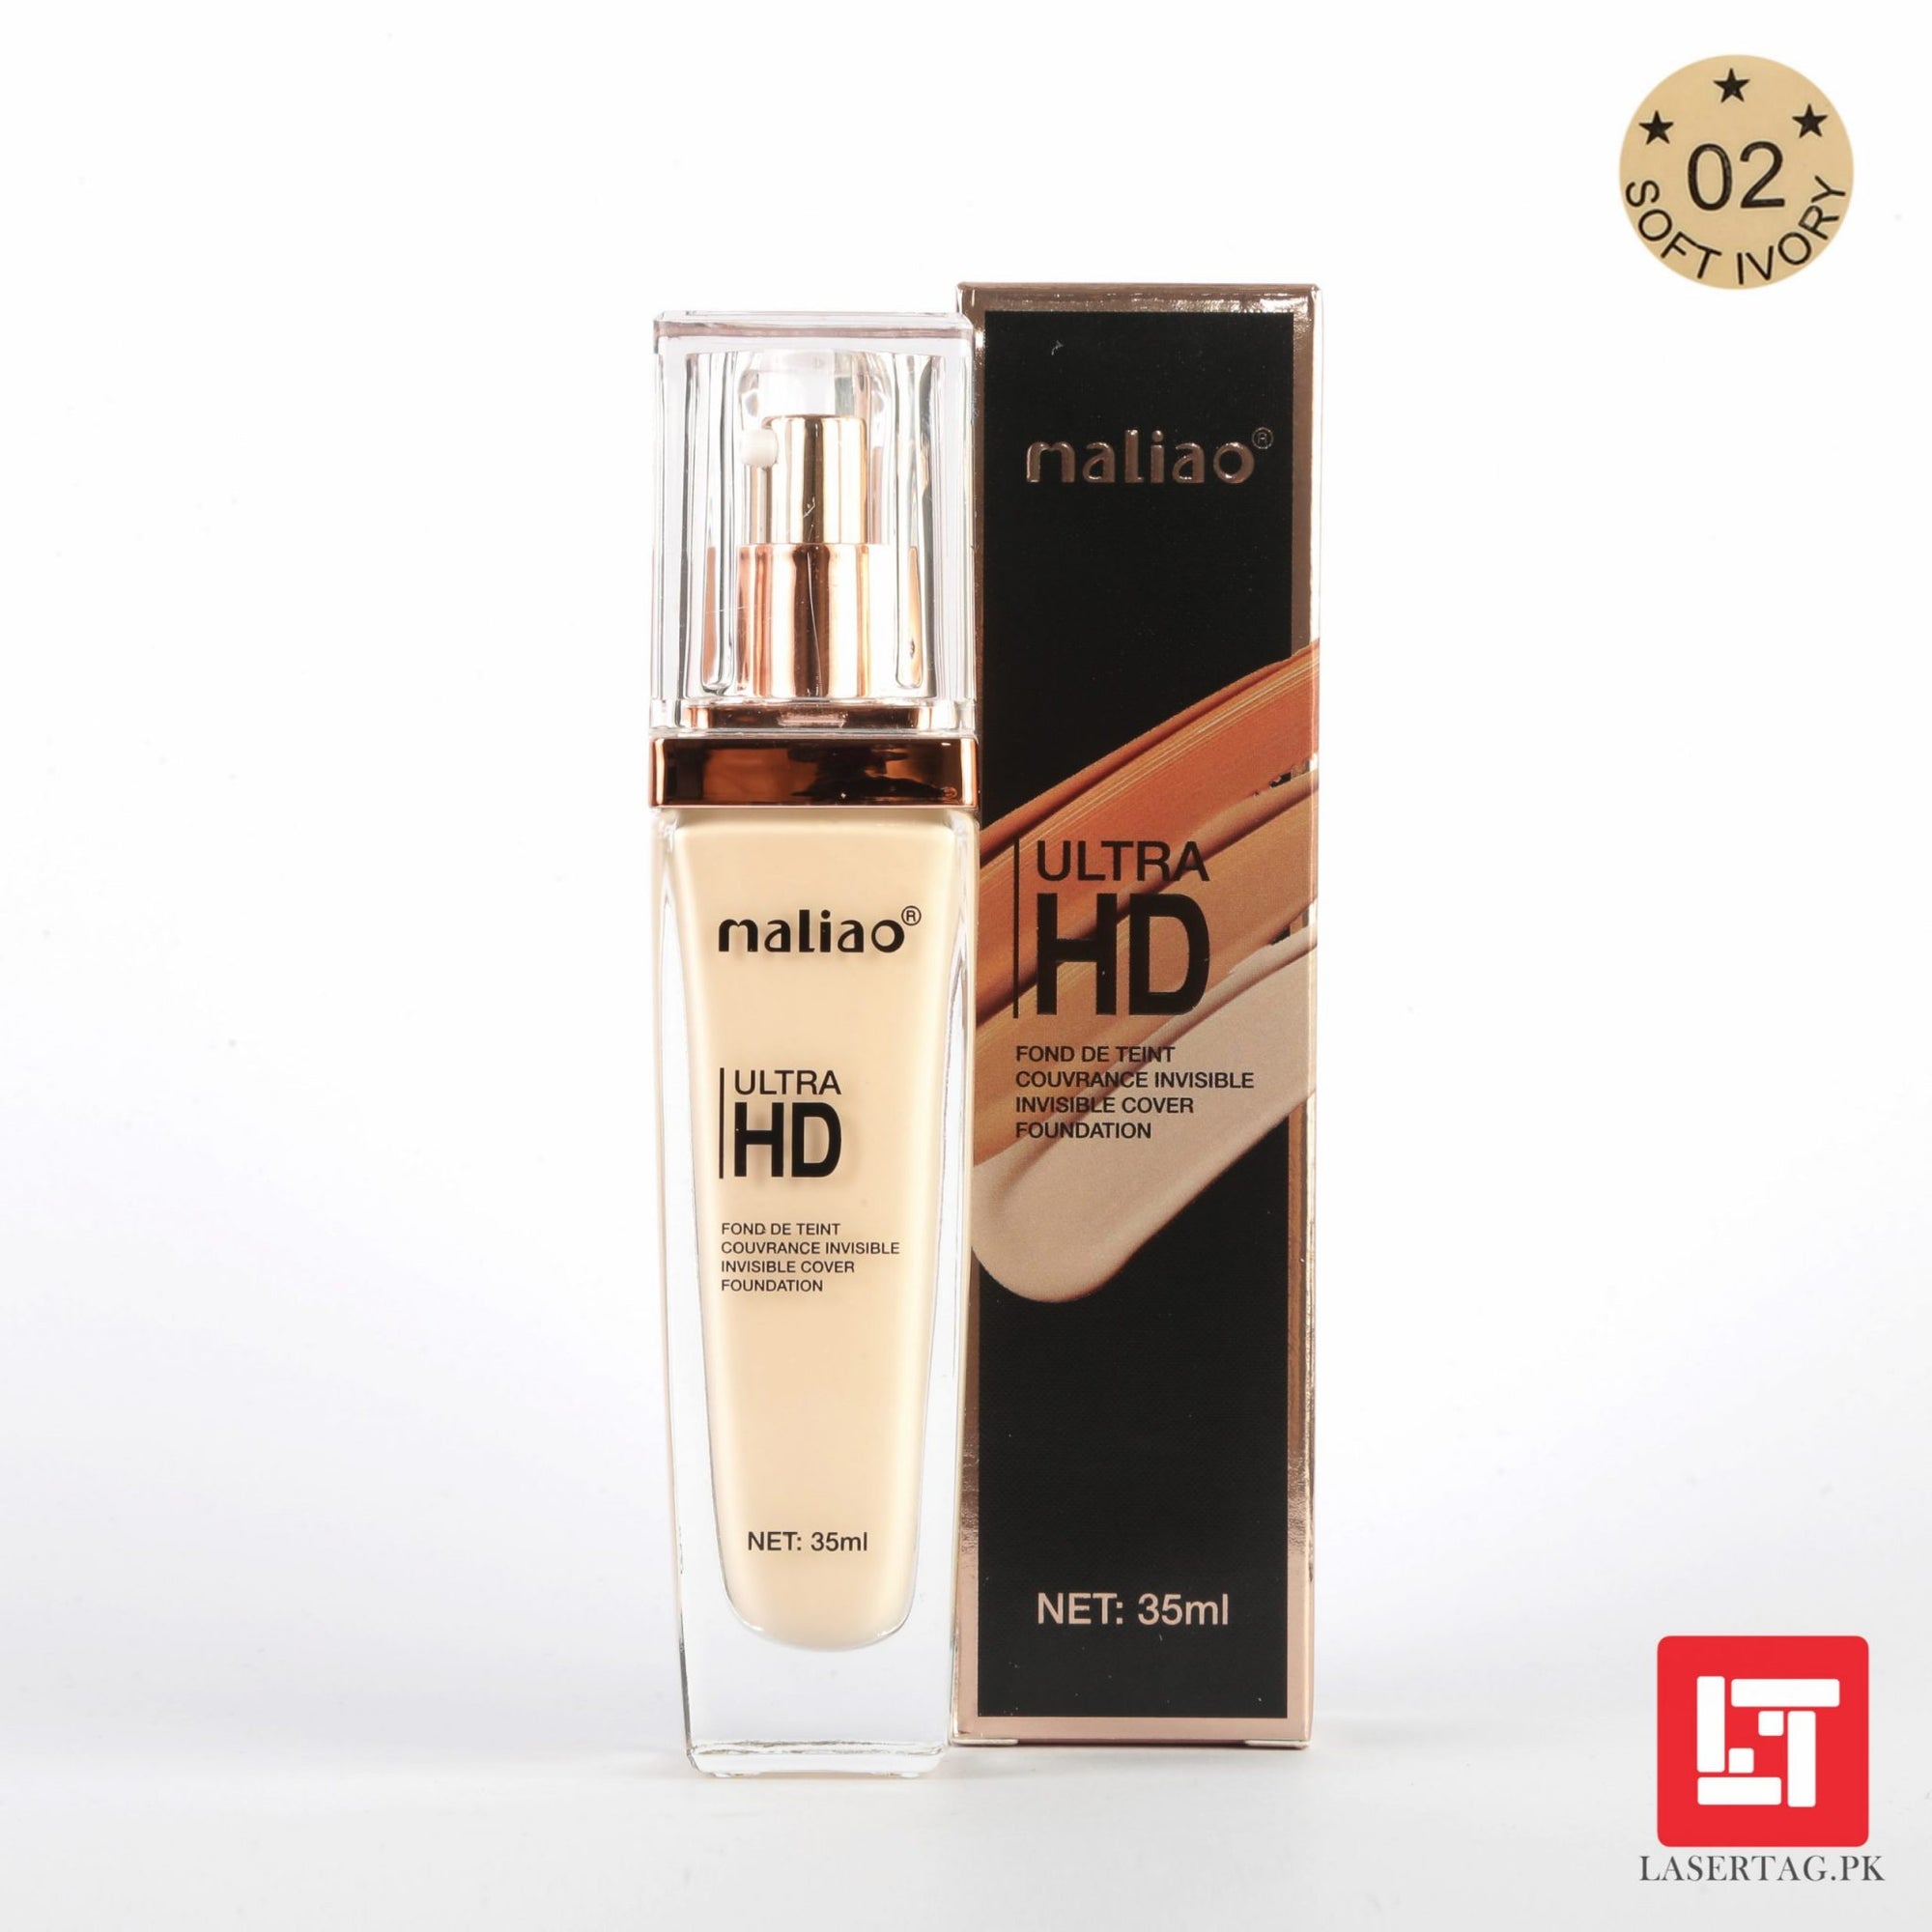 Maliao Ultra HD Invisible Cover Foundation Soft Ivory M217-02 35ml freeshipping - lasertag.pk